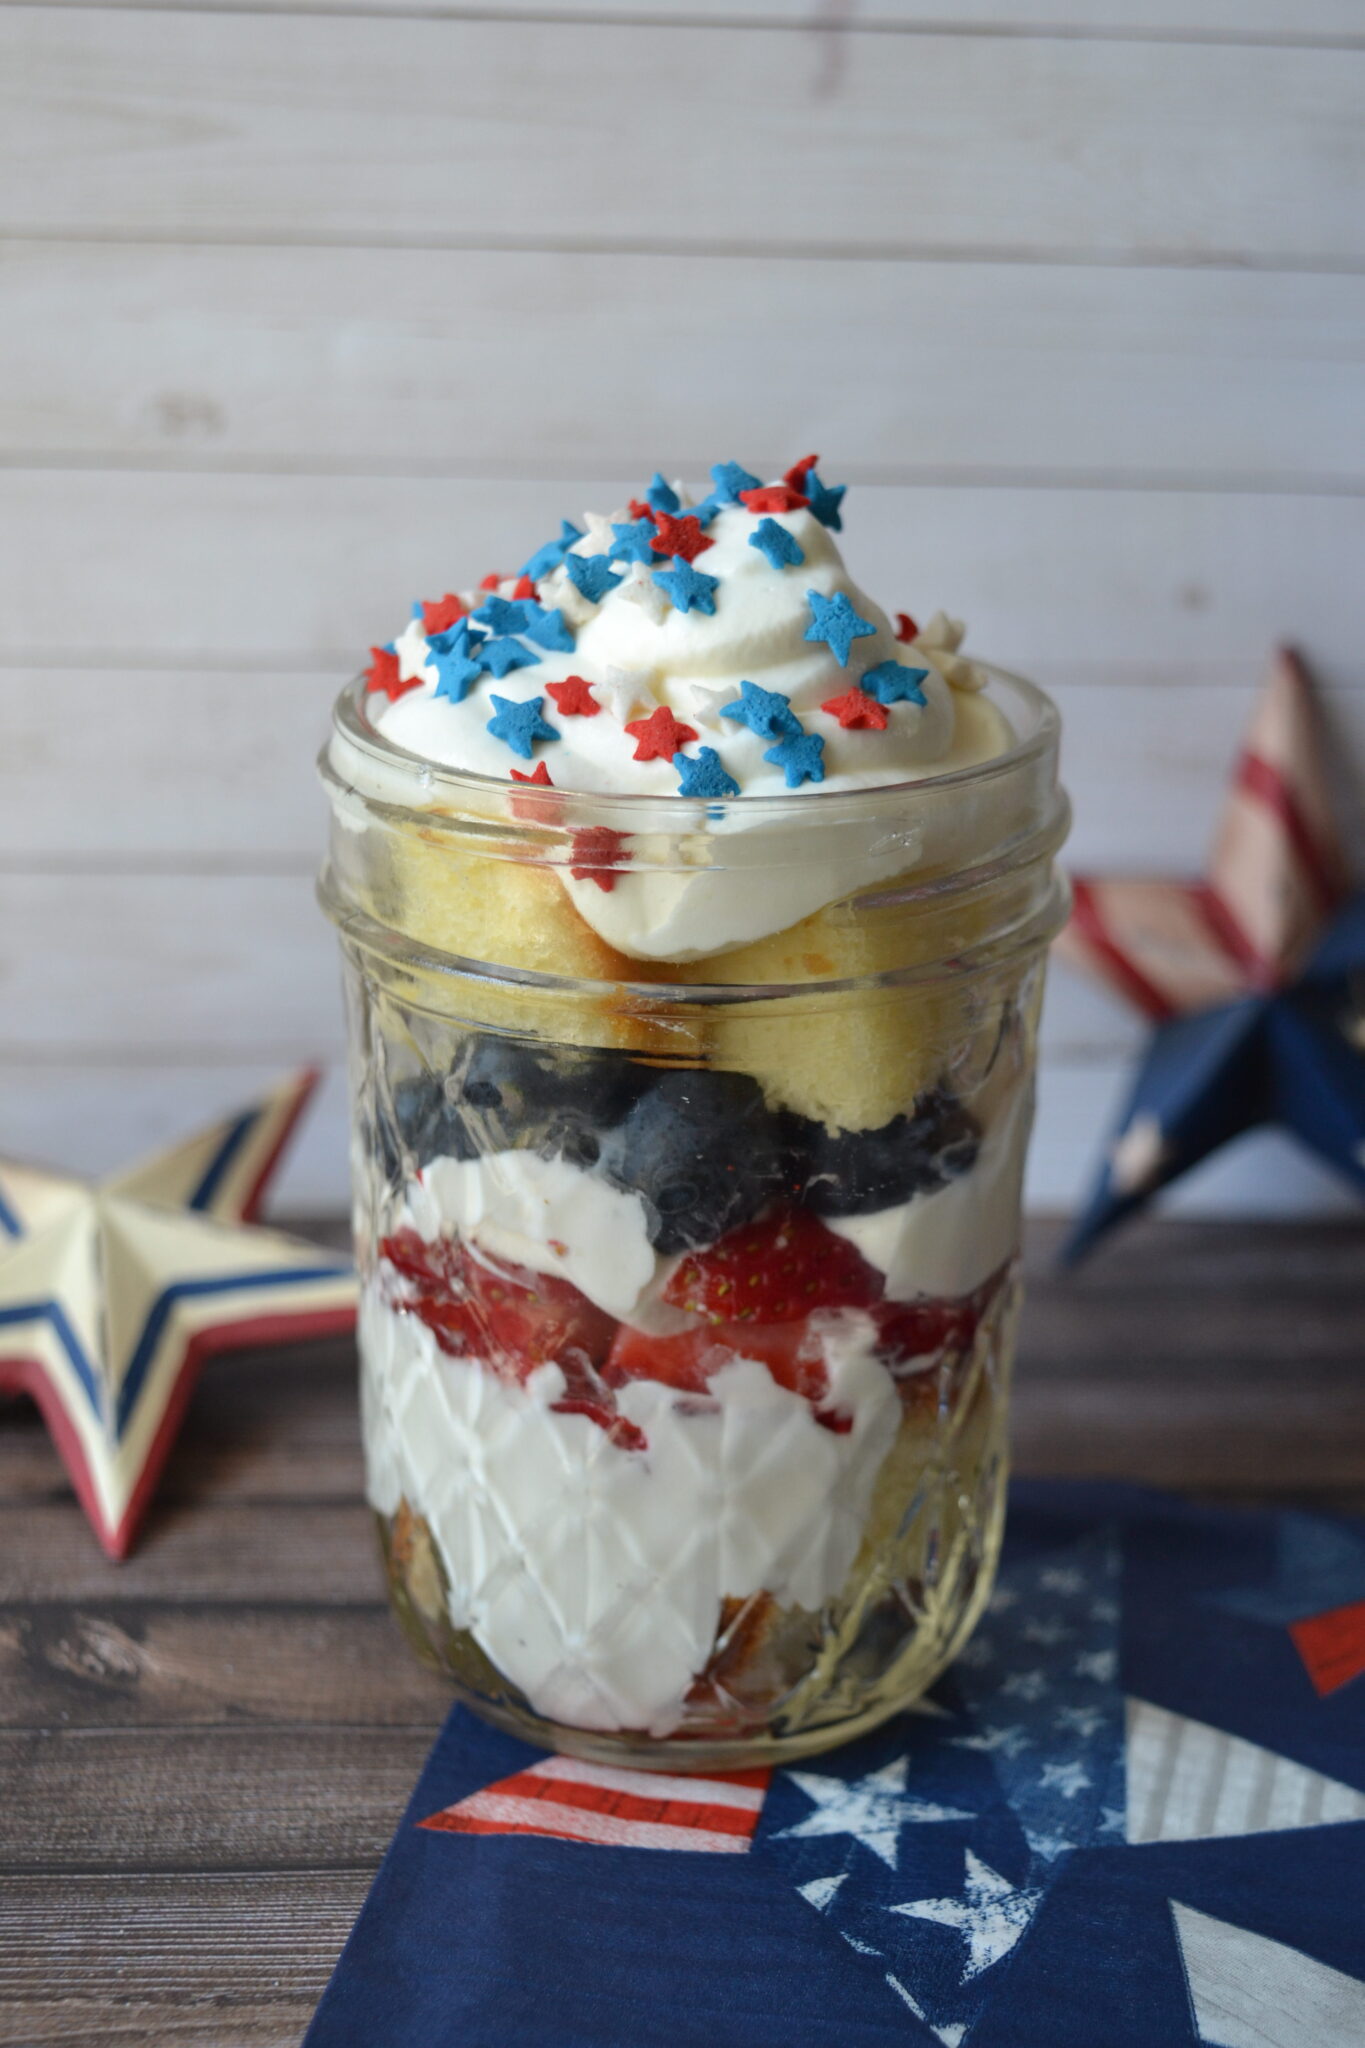 4th of July Trifle - Easiest Recipe Ever - Stylish Life for Moms